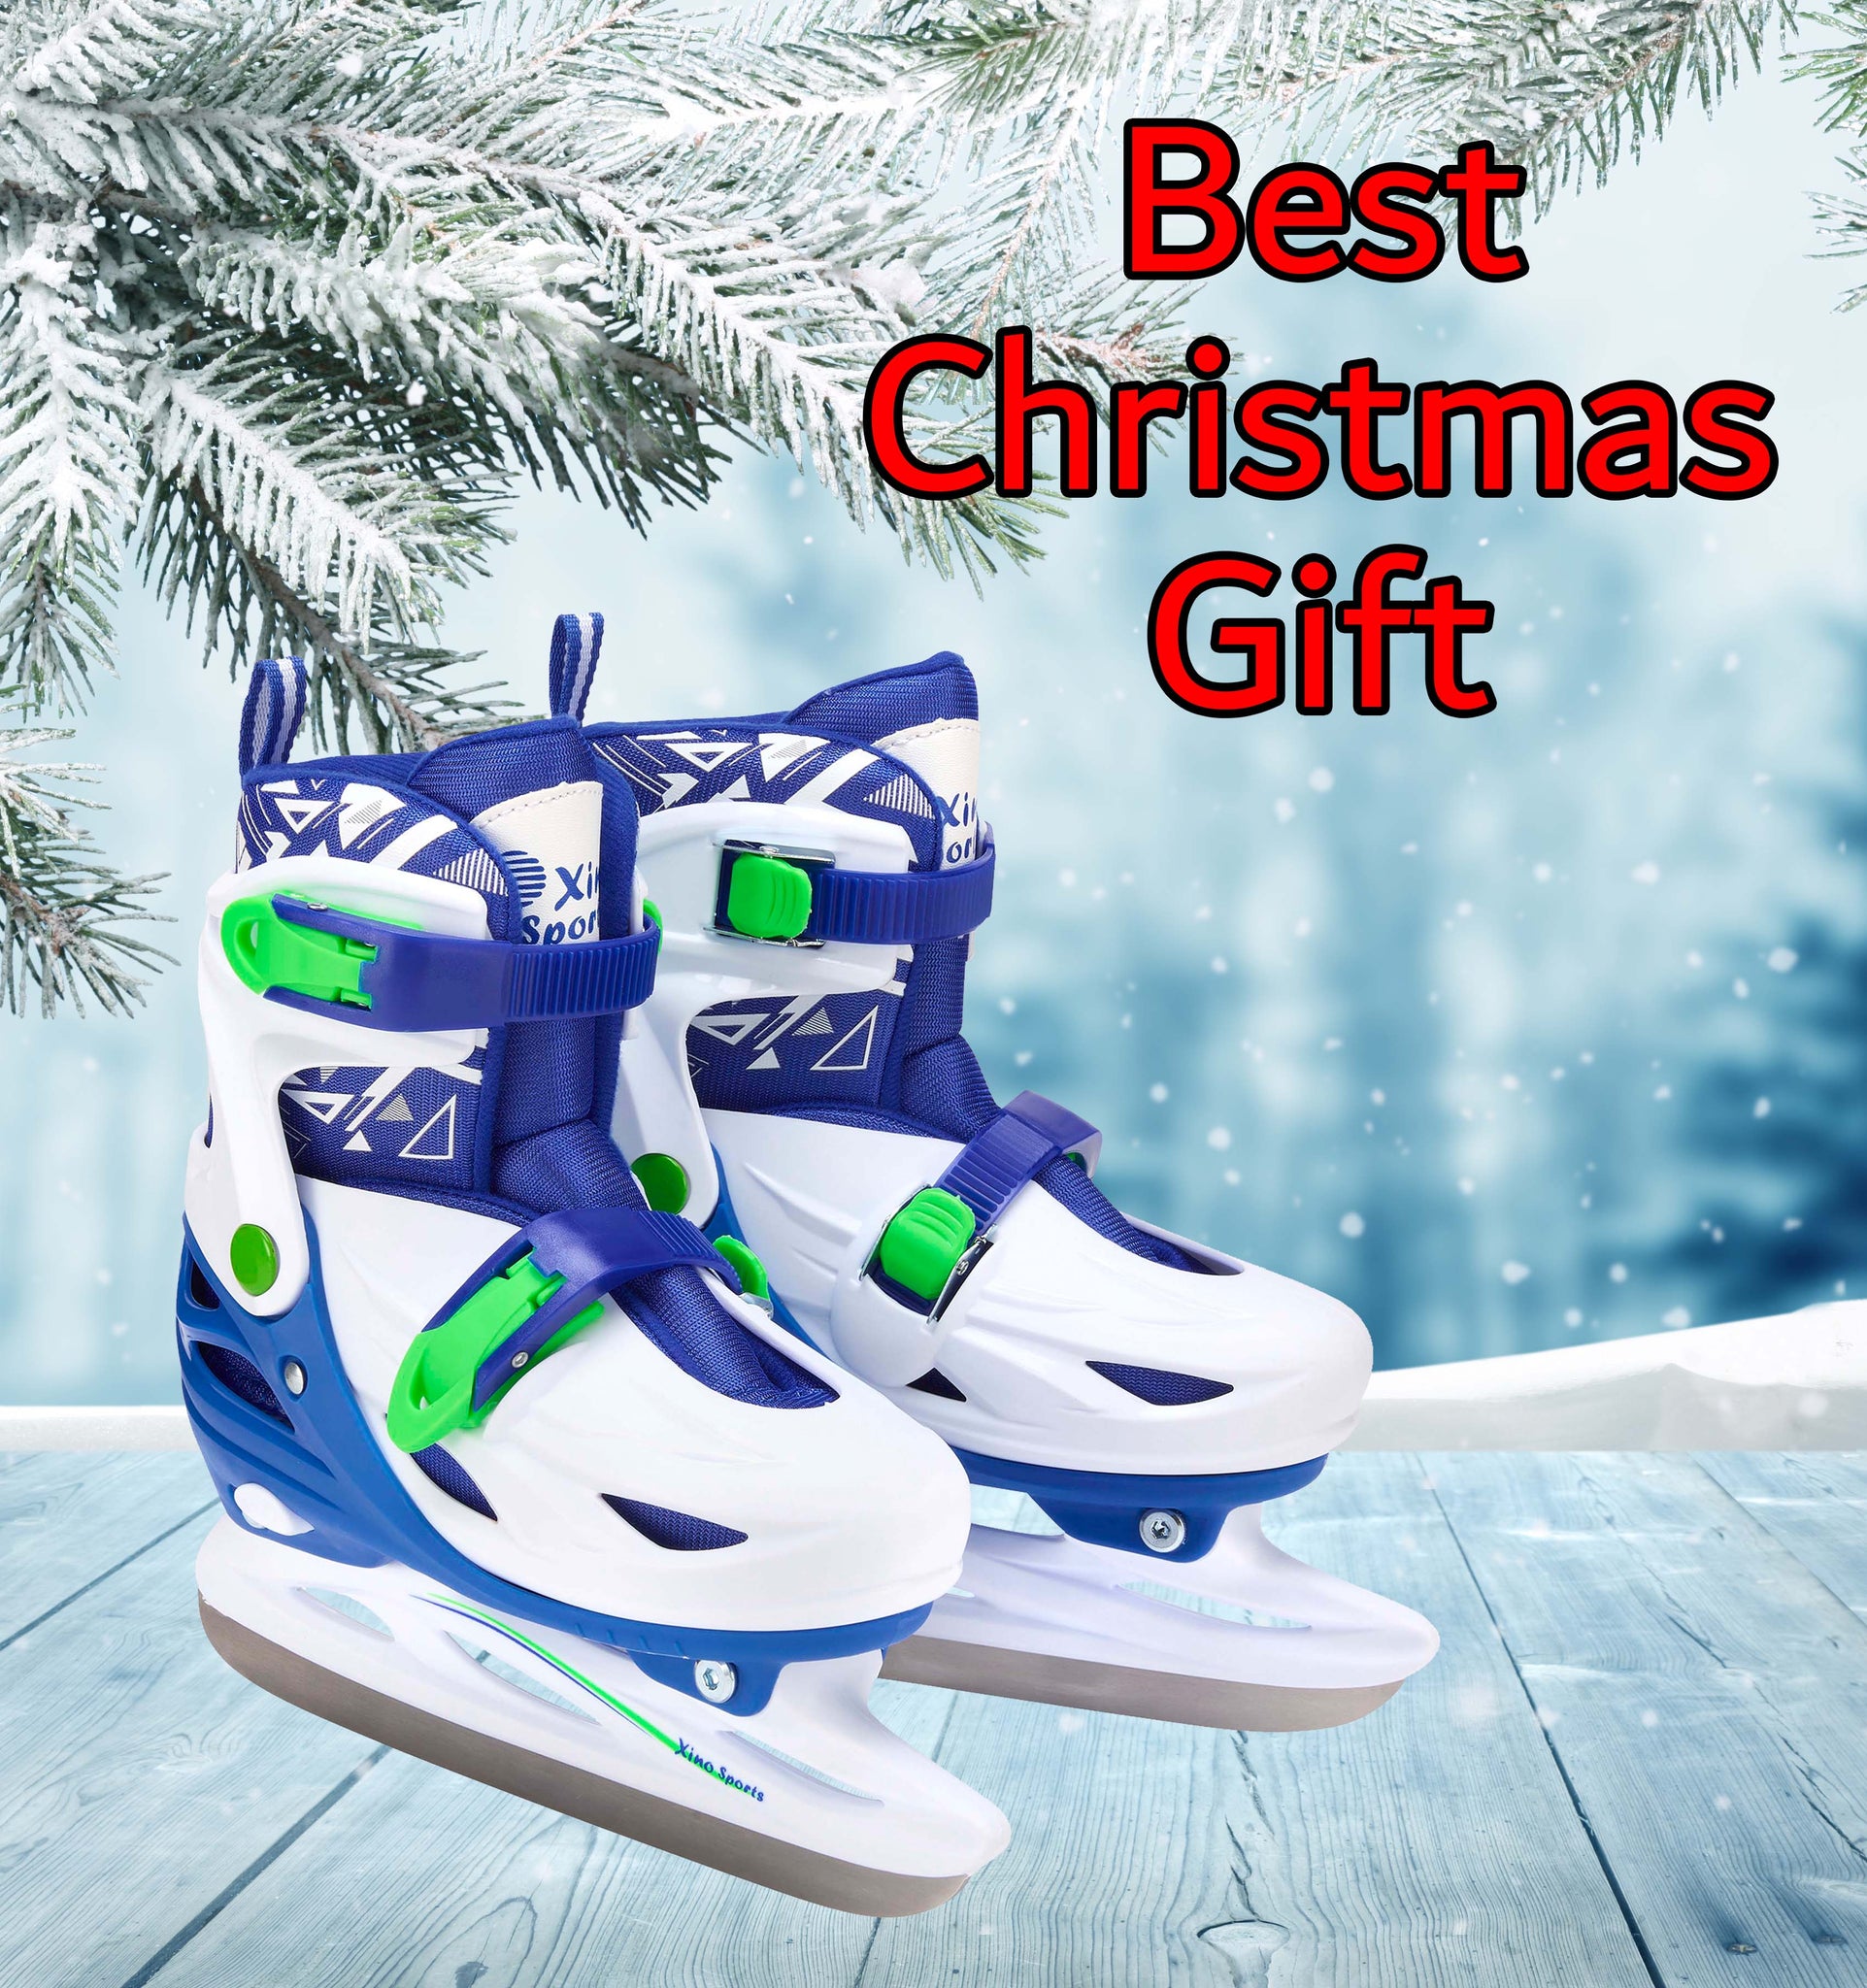 Adjustable Ice Skates For Kids | Reinforced Ankle Support - Xino Sports